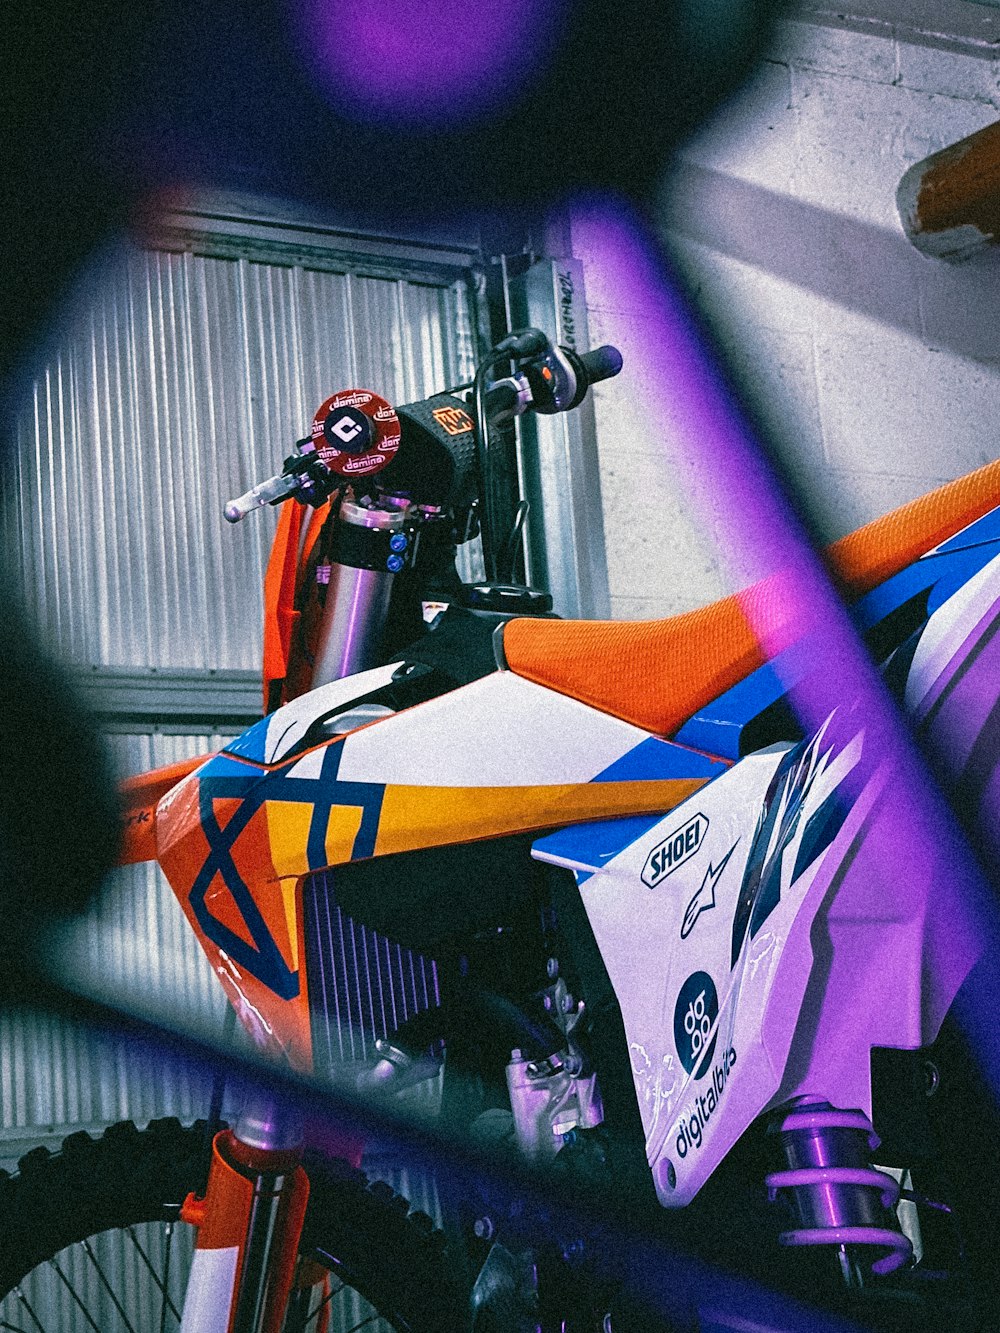 a colorful dirt bike parked next to a building